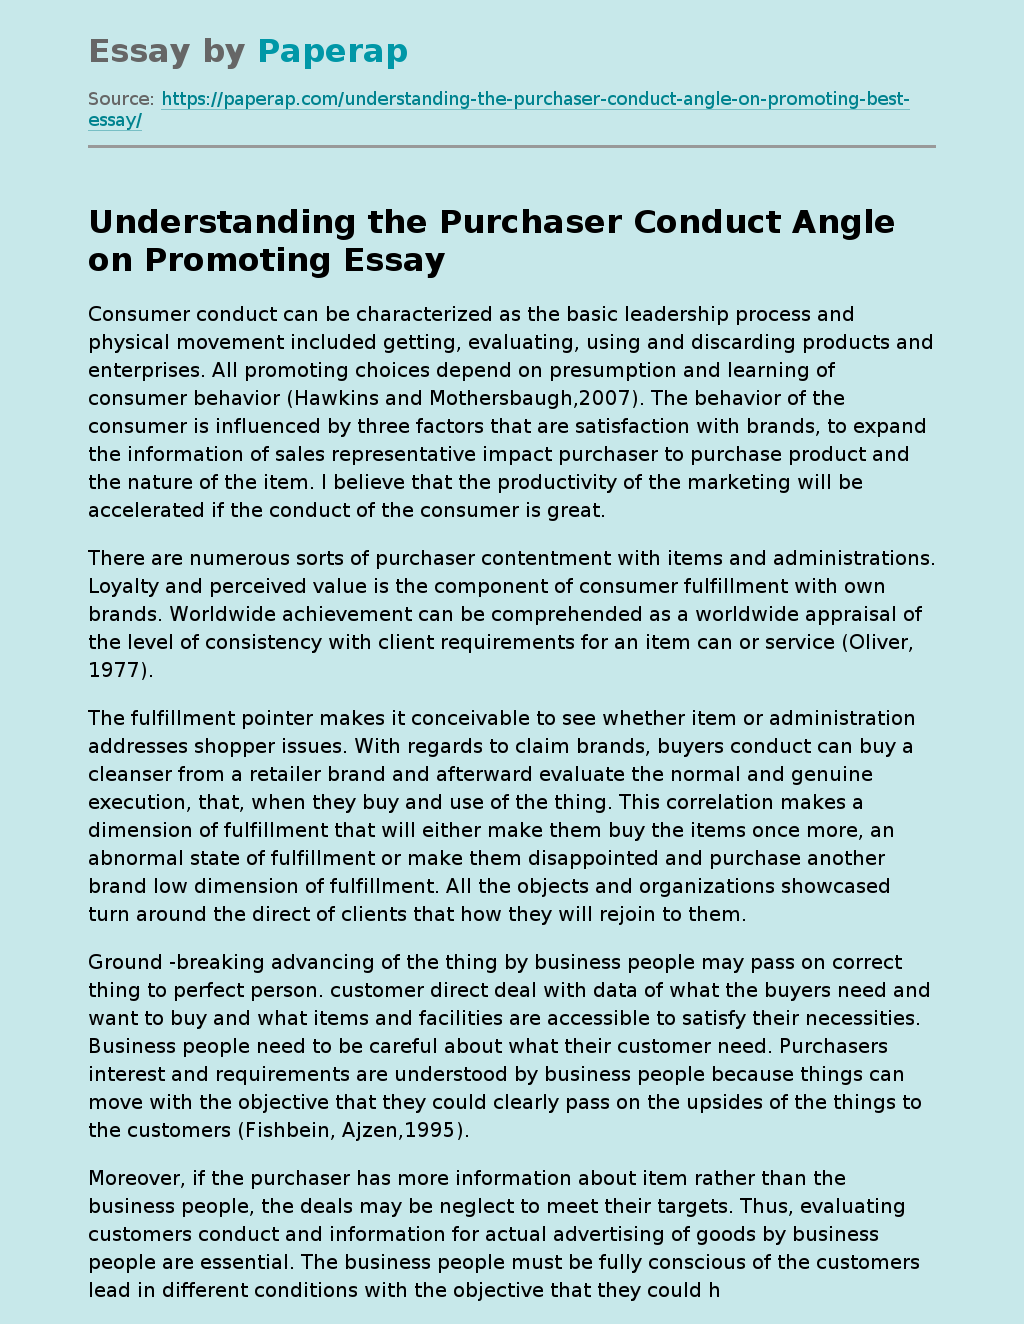 Understanding the Purchaser Conduct Angle on Promoting